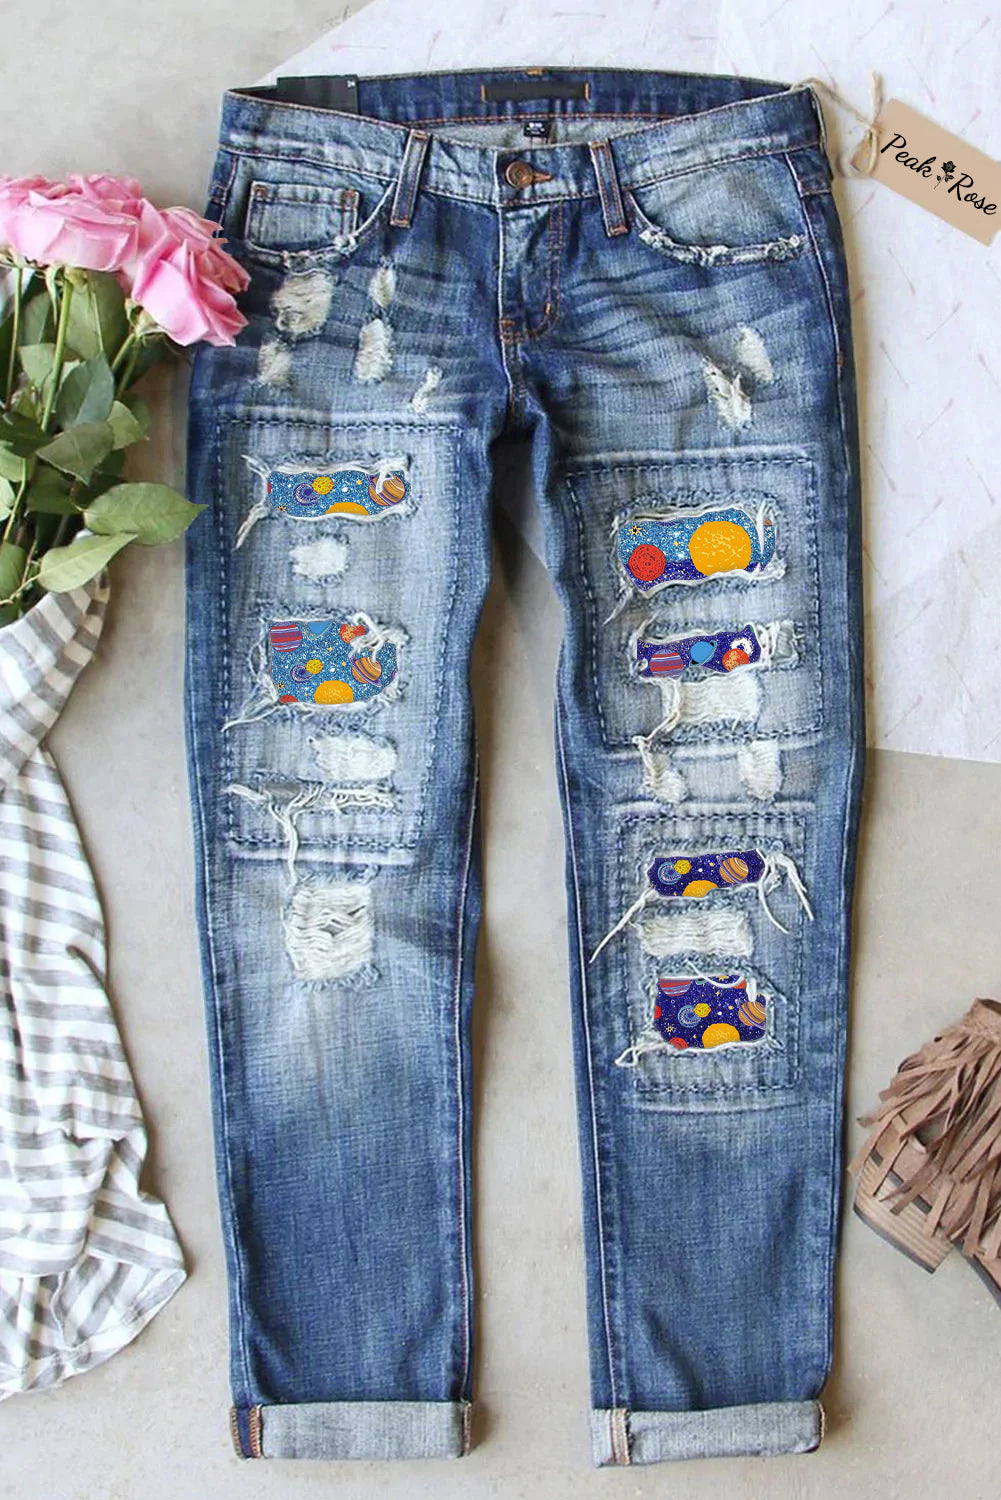 Water & Sky One Color Metaverse Wonderful Galaxy Planet Travel Print Ripped Denim Jeans